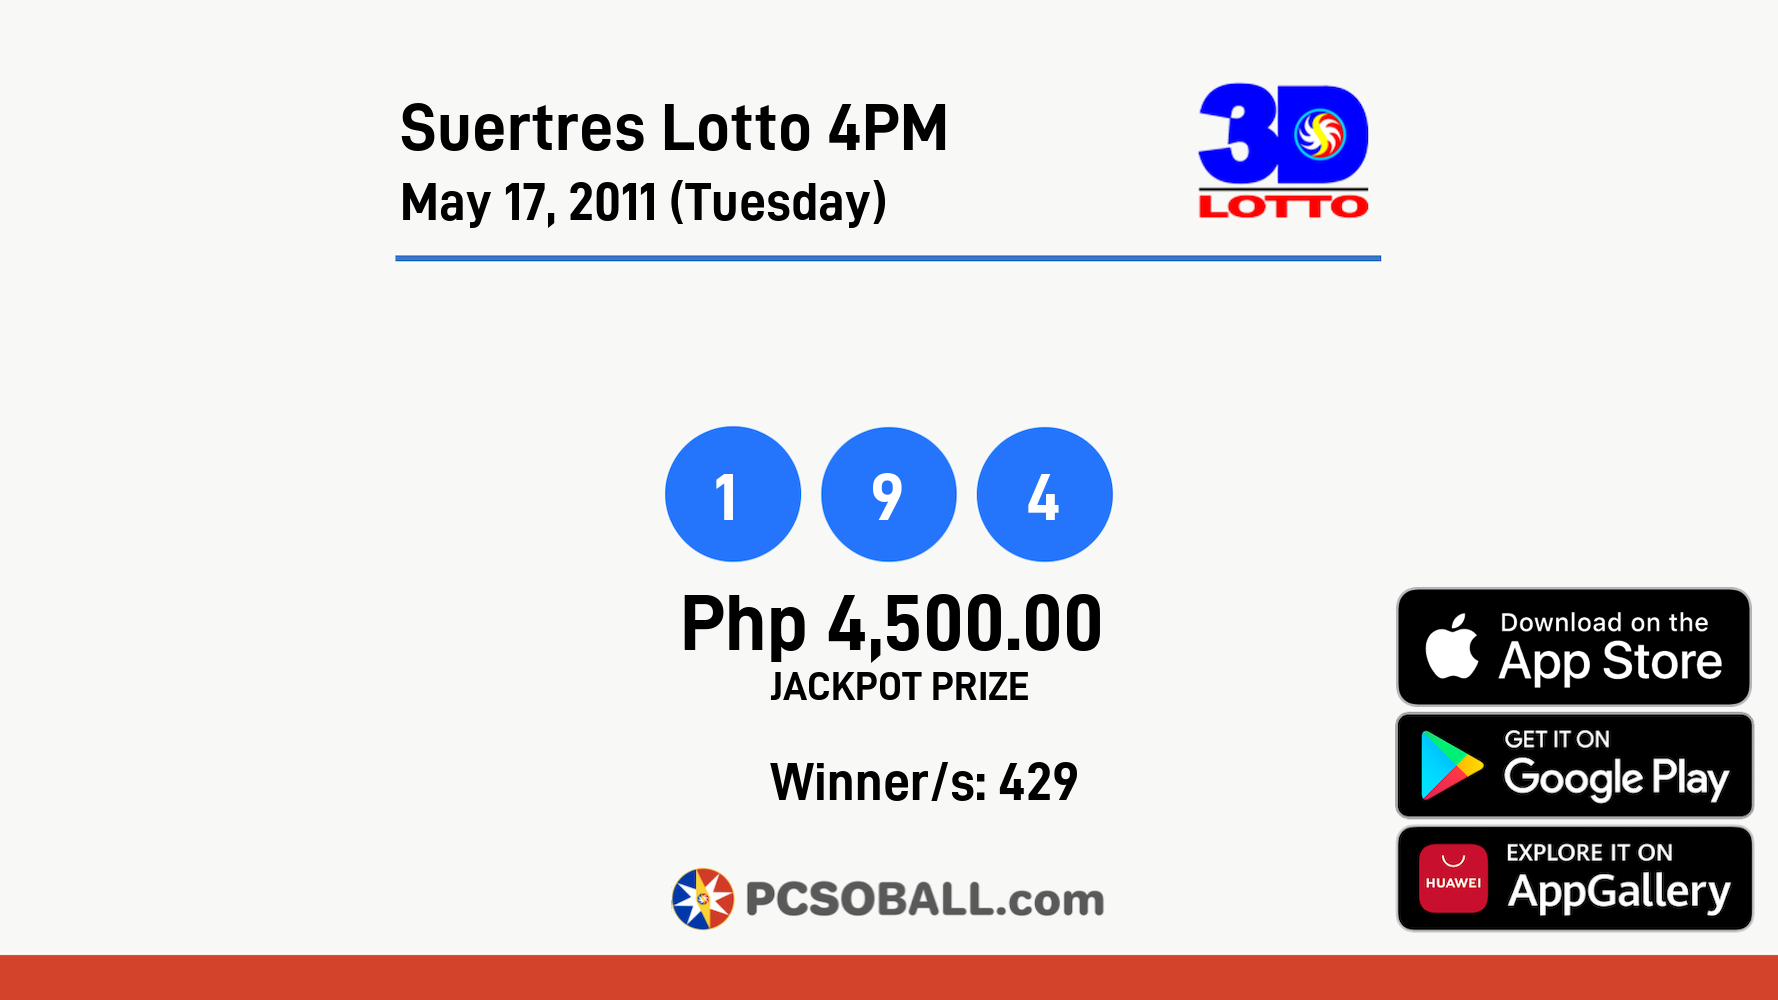 Suertres Lotto 4PM May 17, 2011 (Tuesday) Result